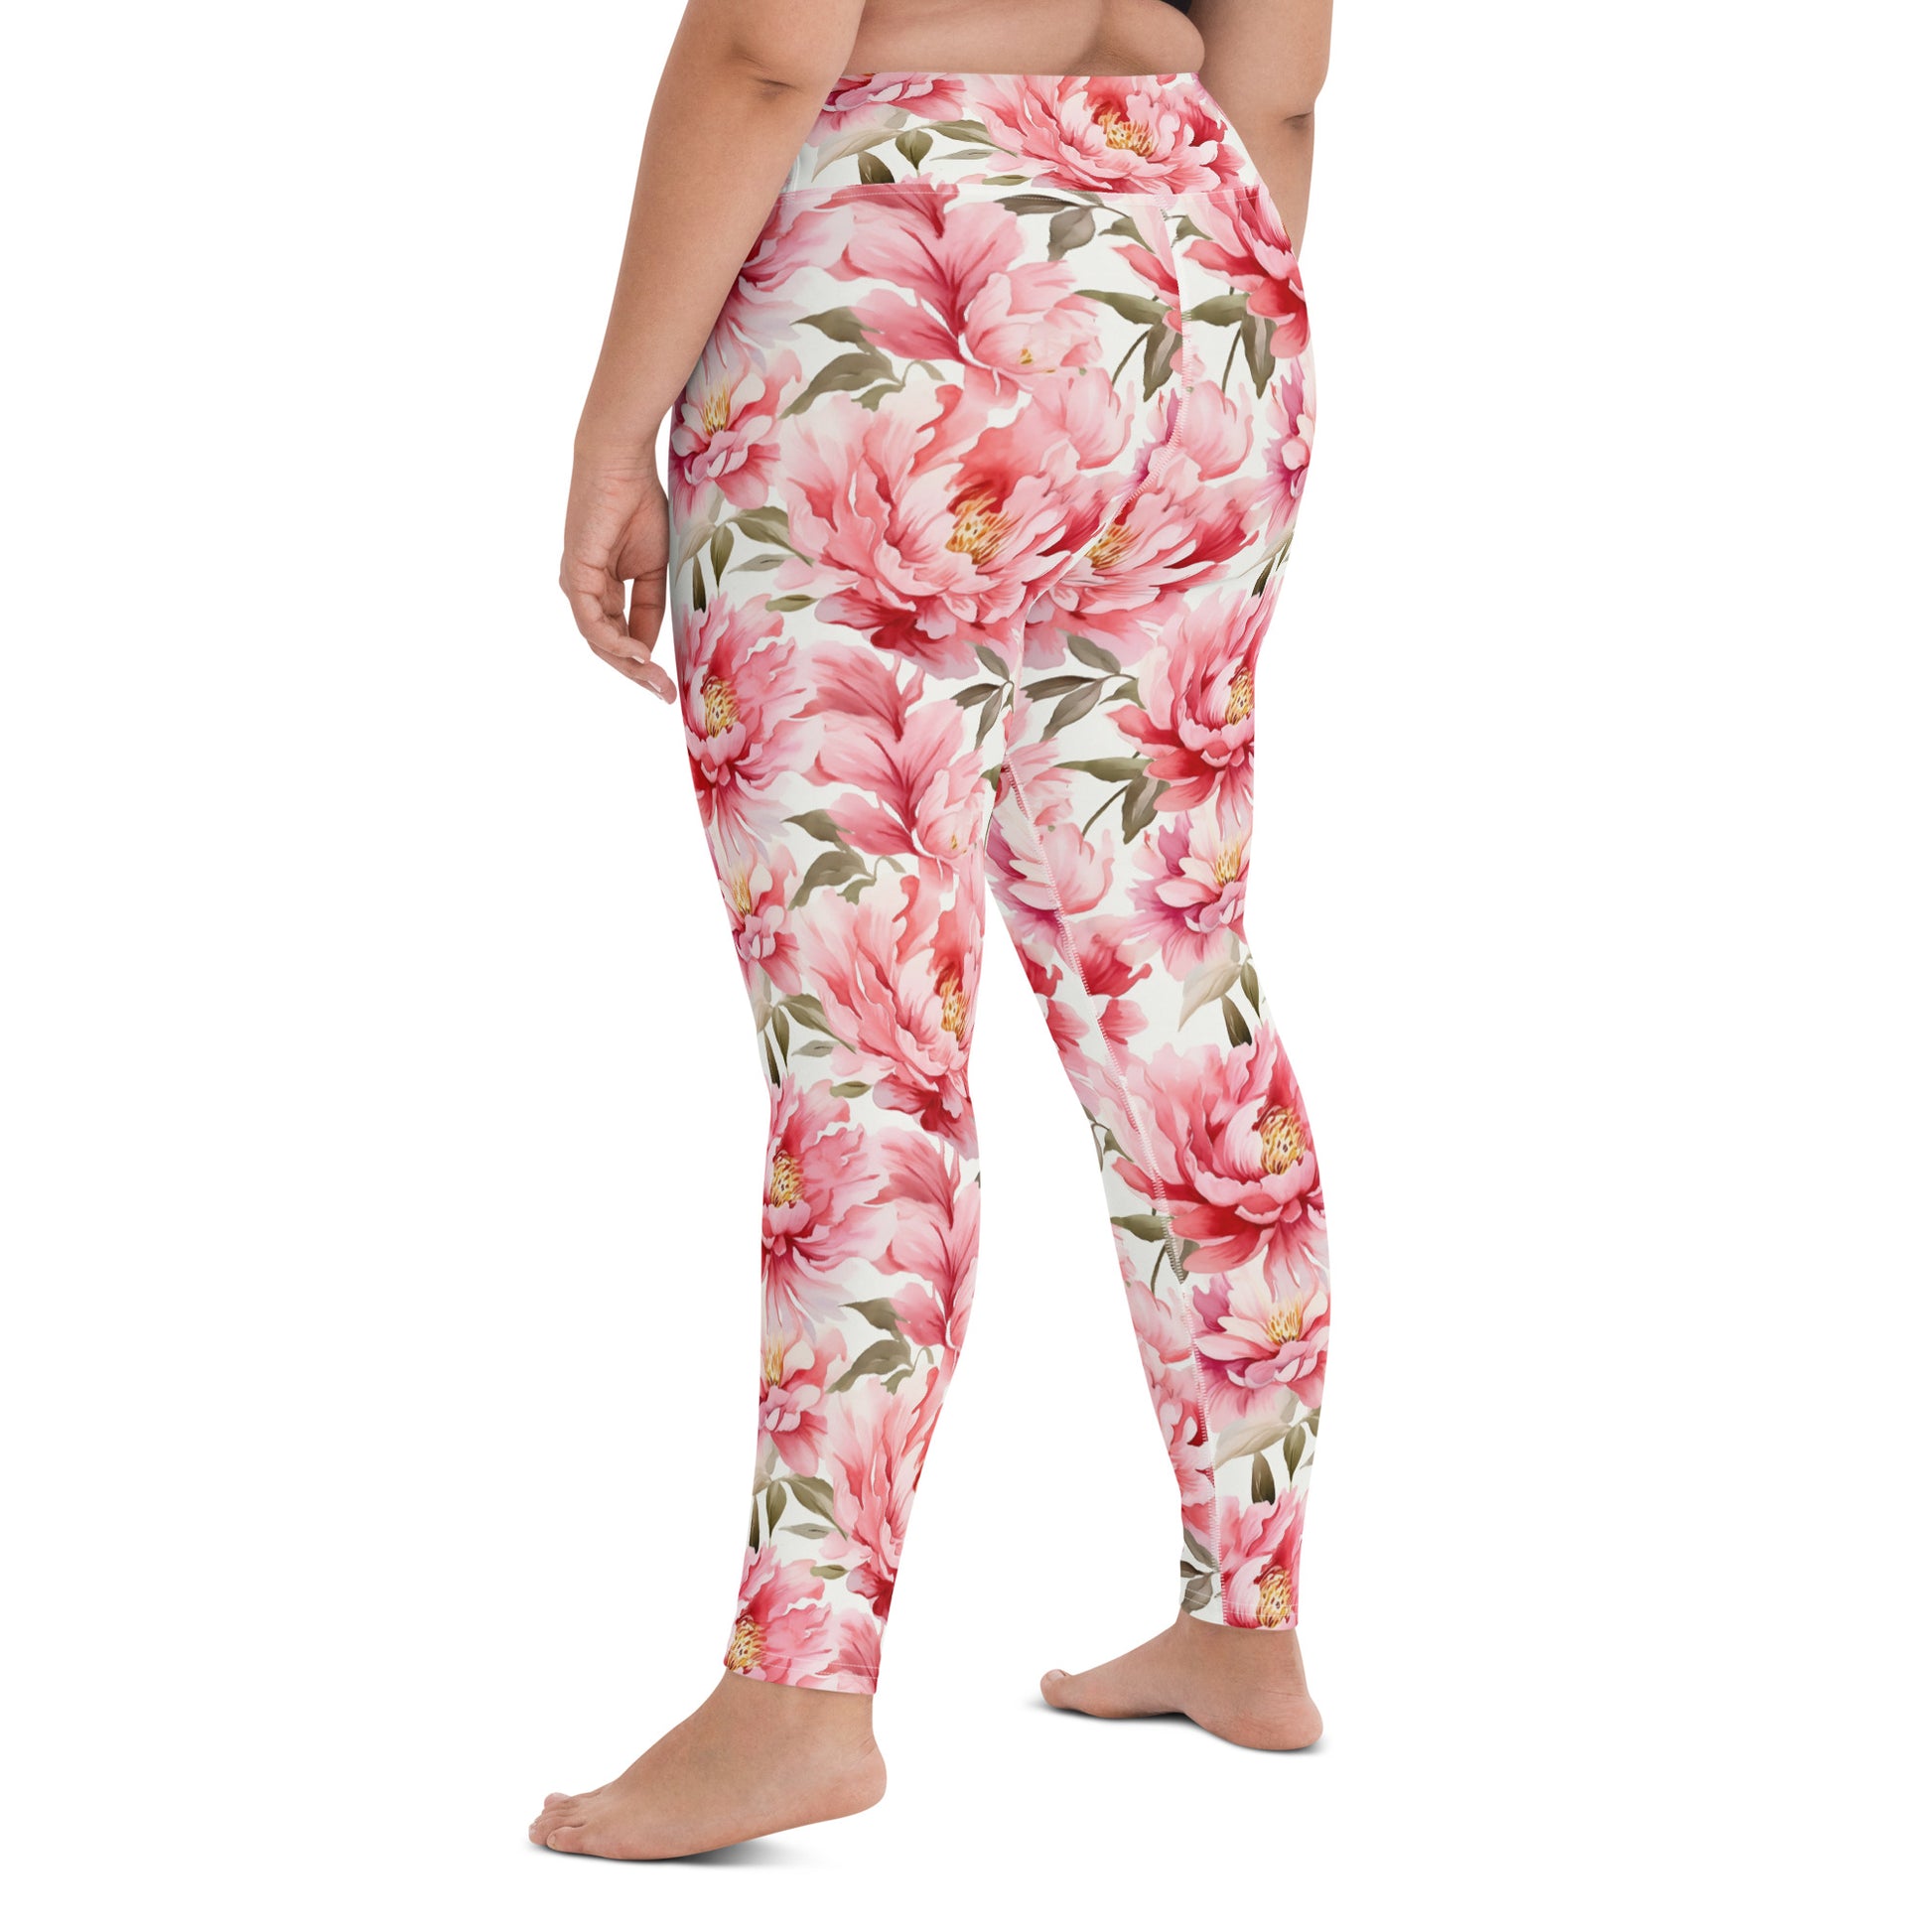 Pink Flowers Yoga Leggings Women, Peony Floral High Waisted Pants Cute Printed Graphic Workout Running Gym Designer Starcove Fashion